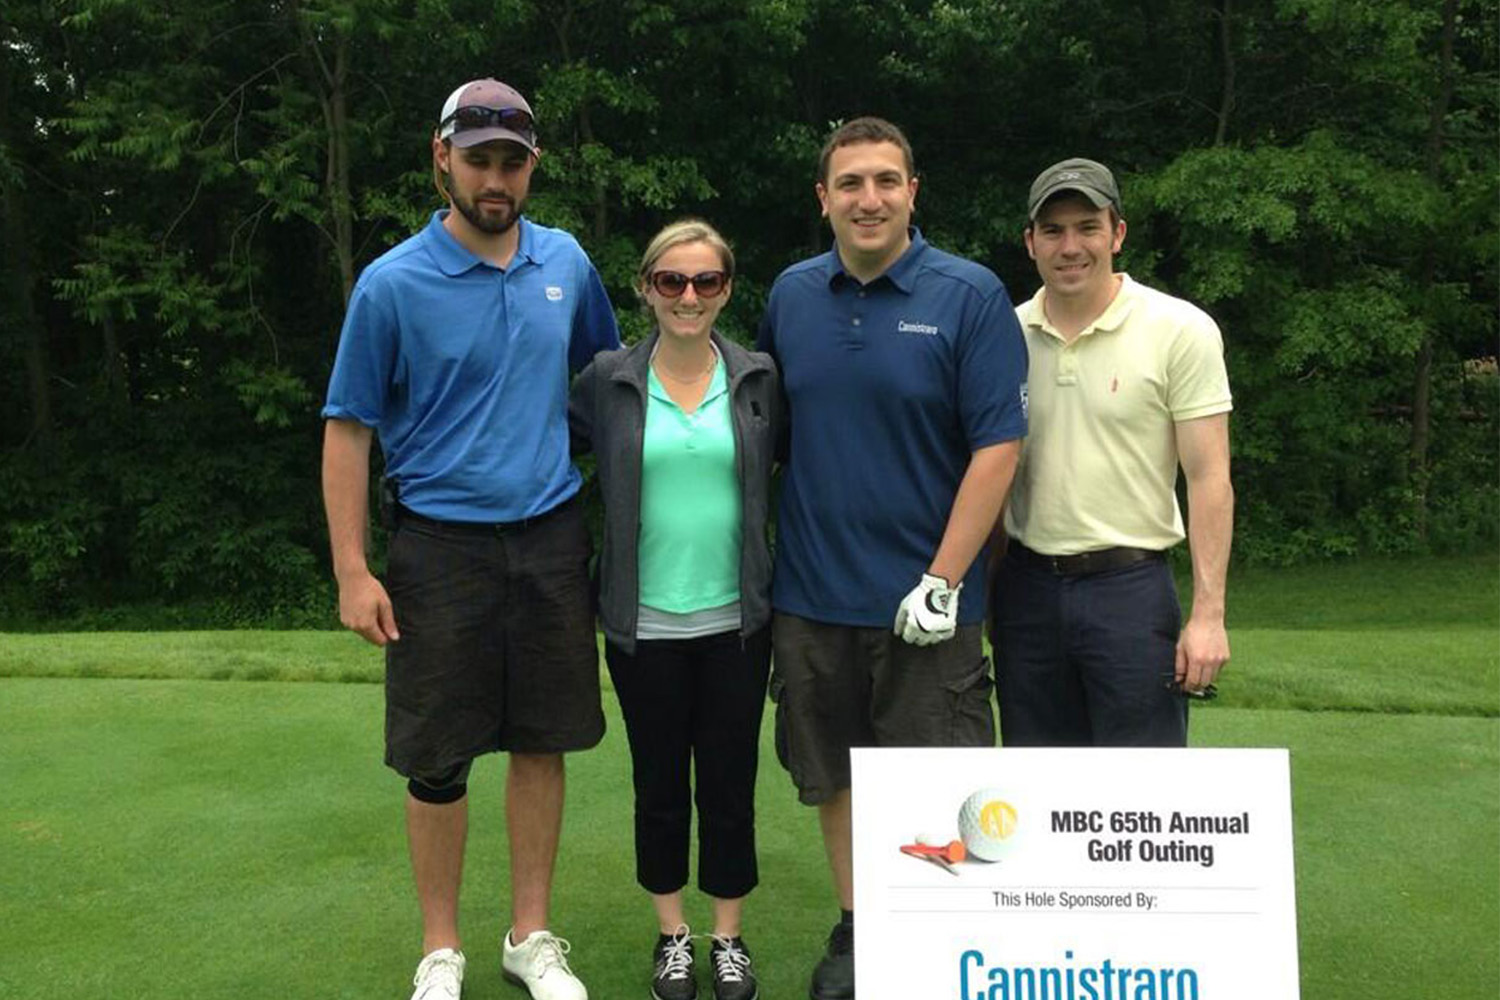 Maria enjoyed golfing with the Cannistraro team who Tocci is working with currently.